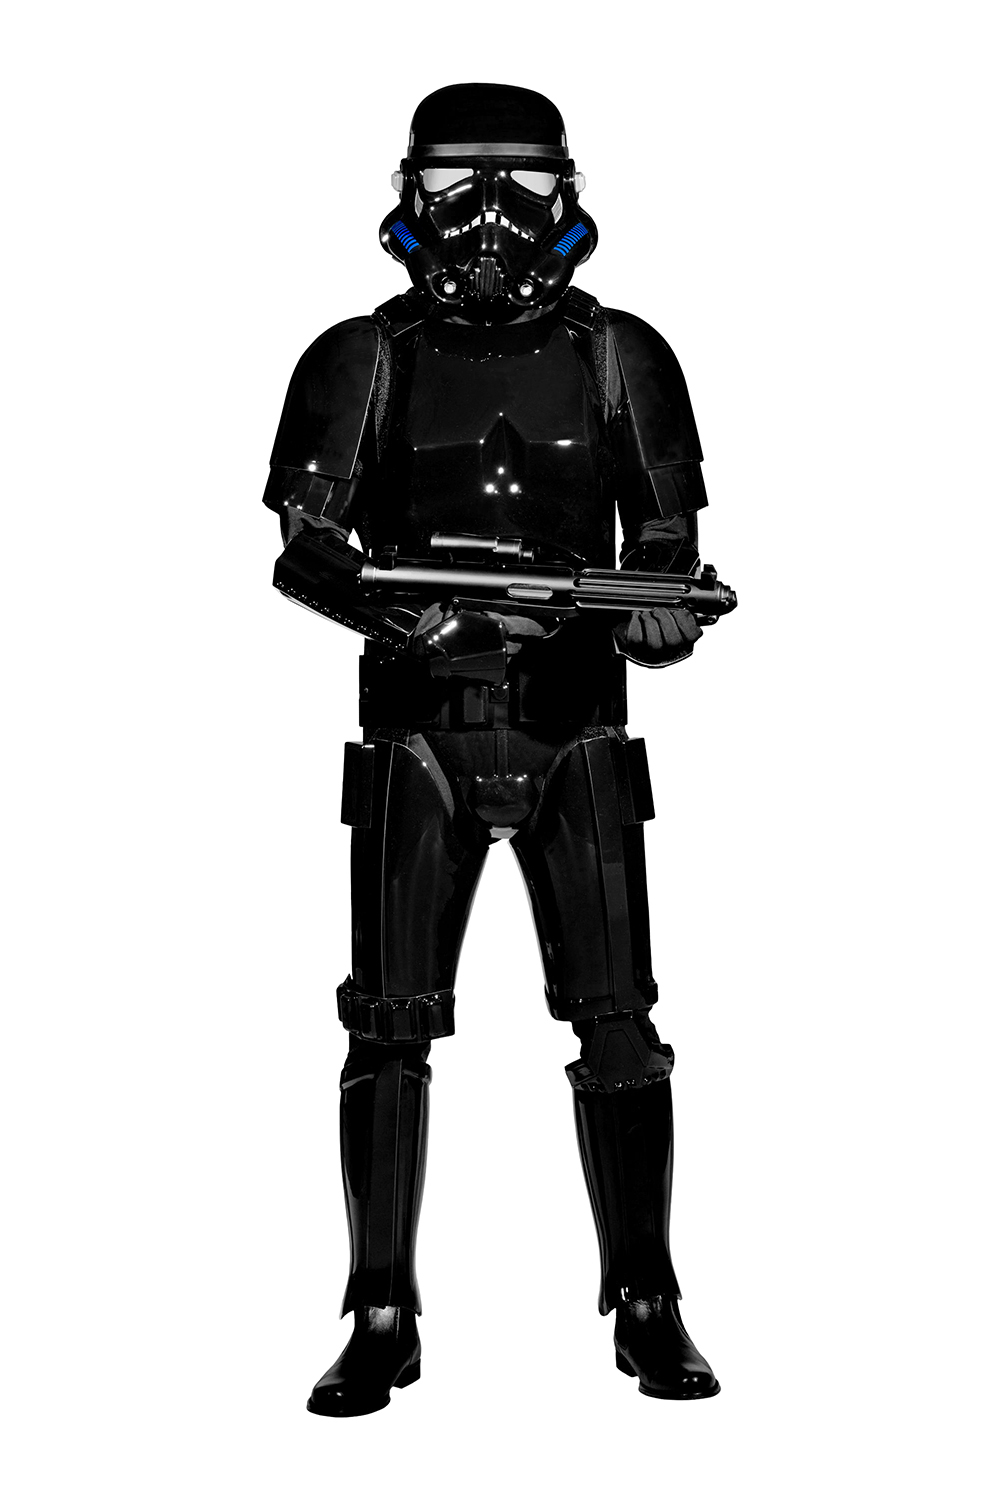 Shadowtrooper Costume Armour Packages available at www.StormtrooperStore.com - The Stormtrooper Store